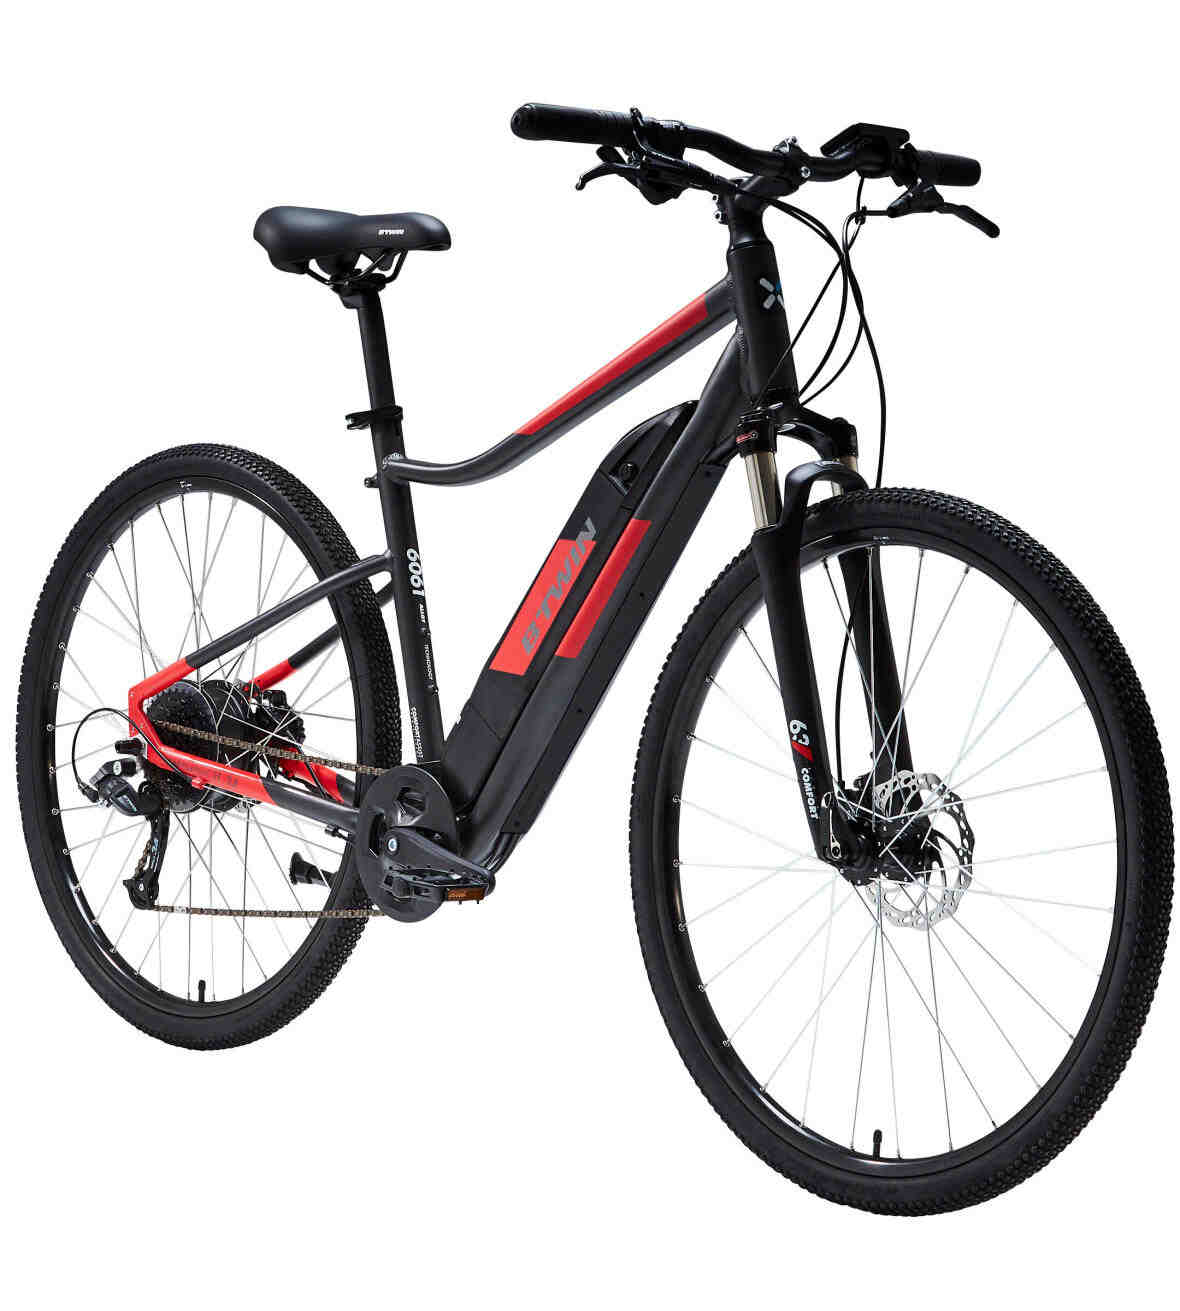 Should I charge my ebike after every ride?